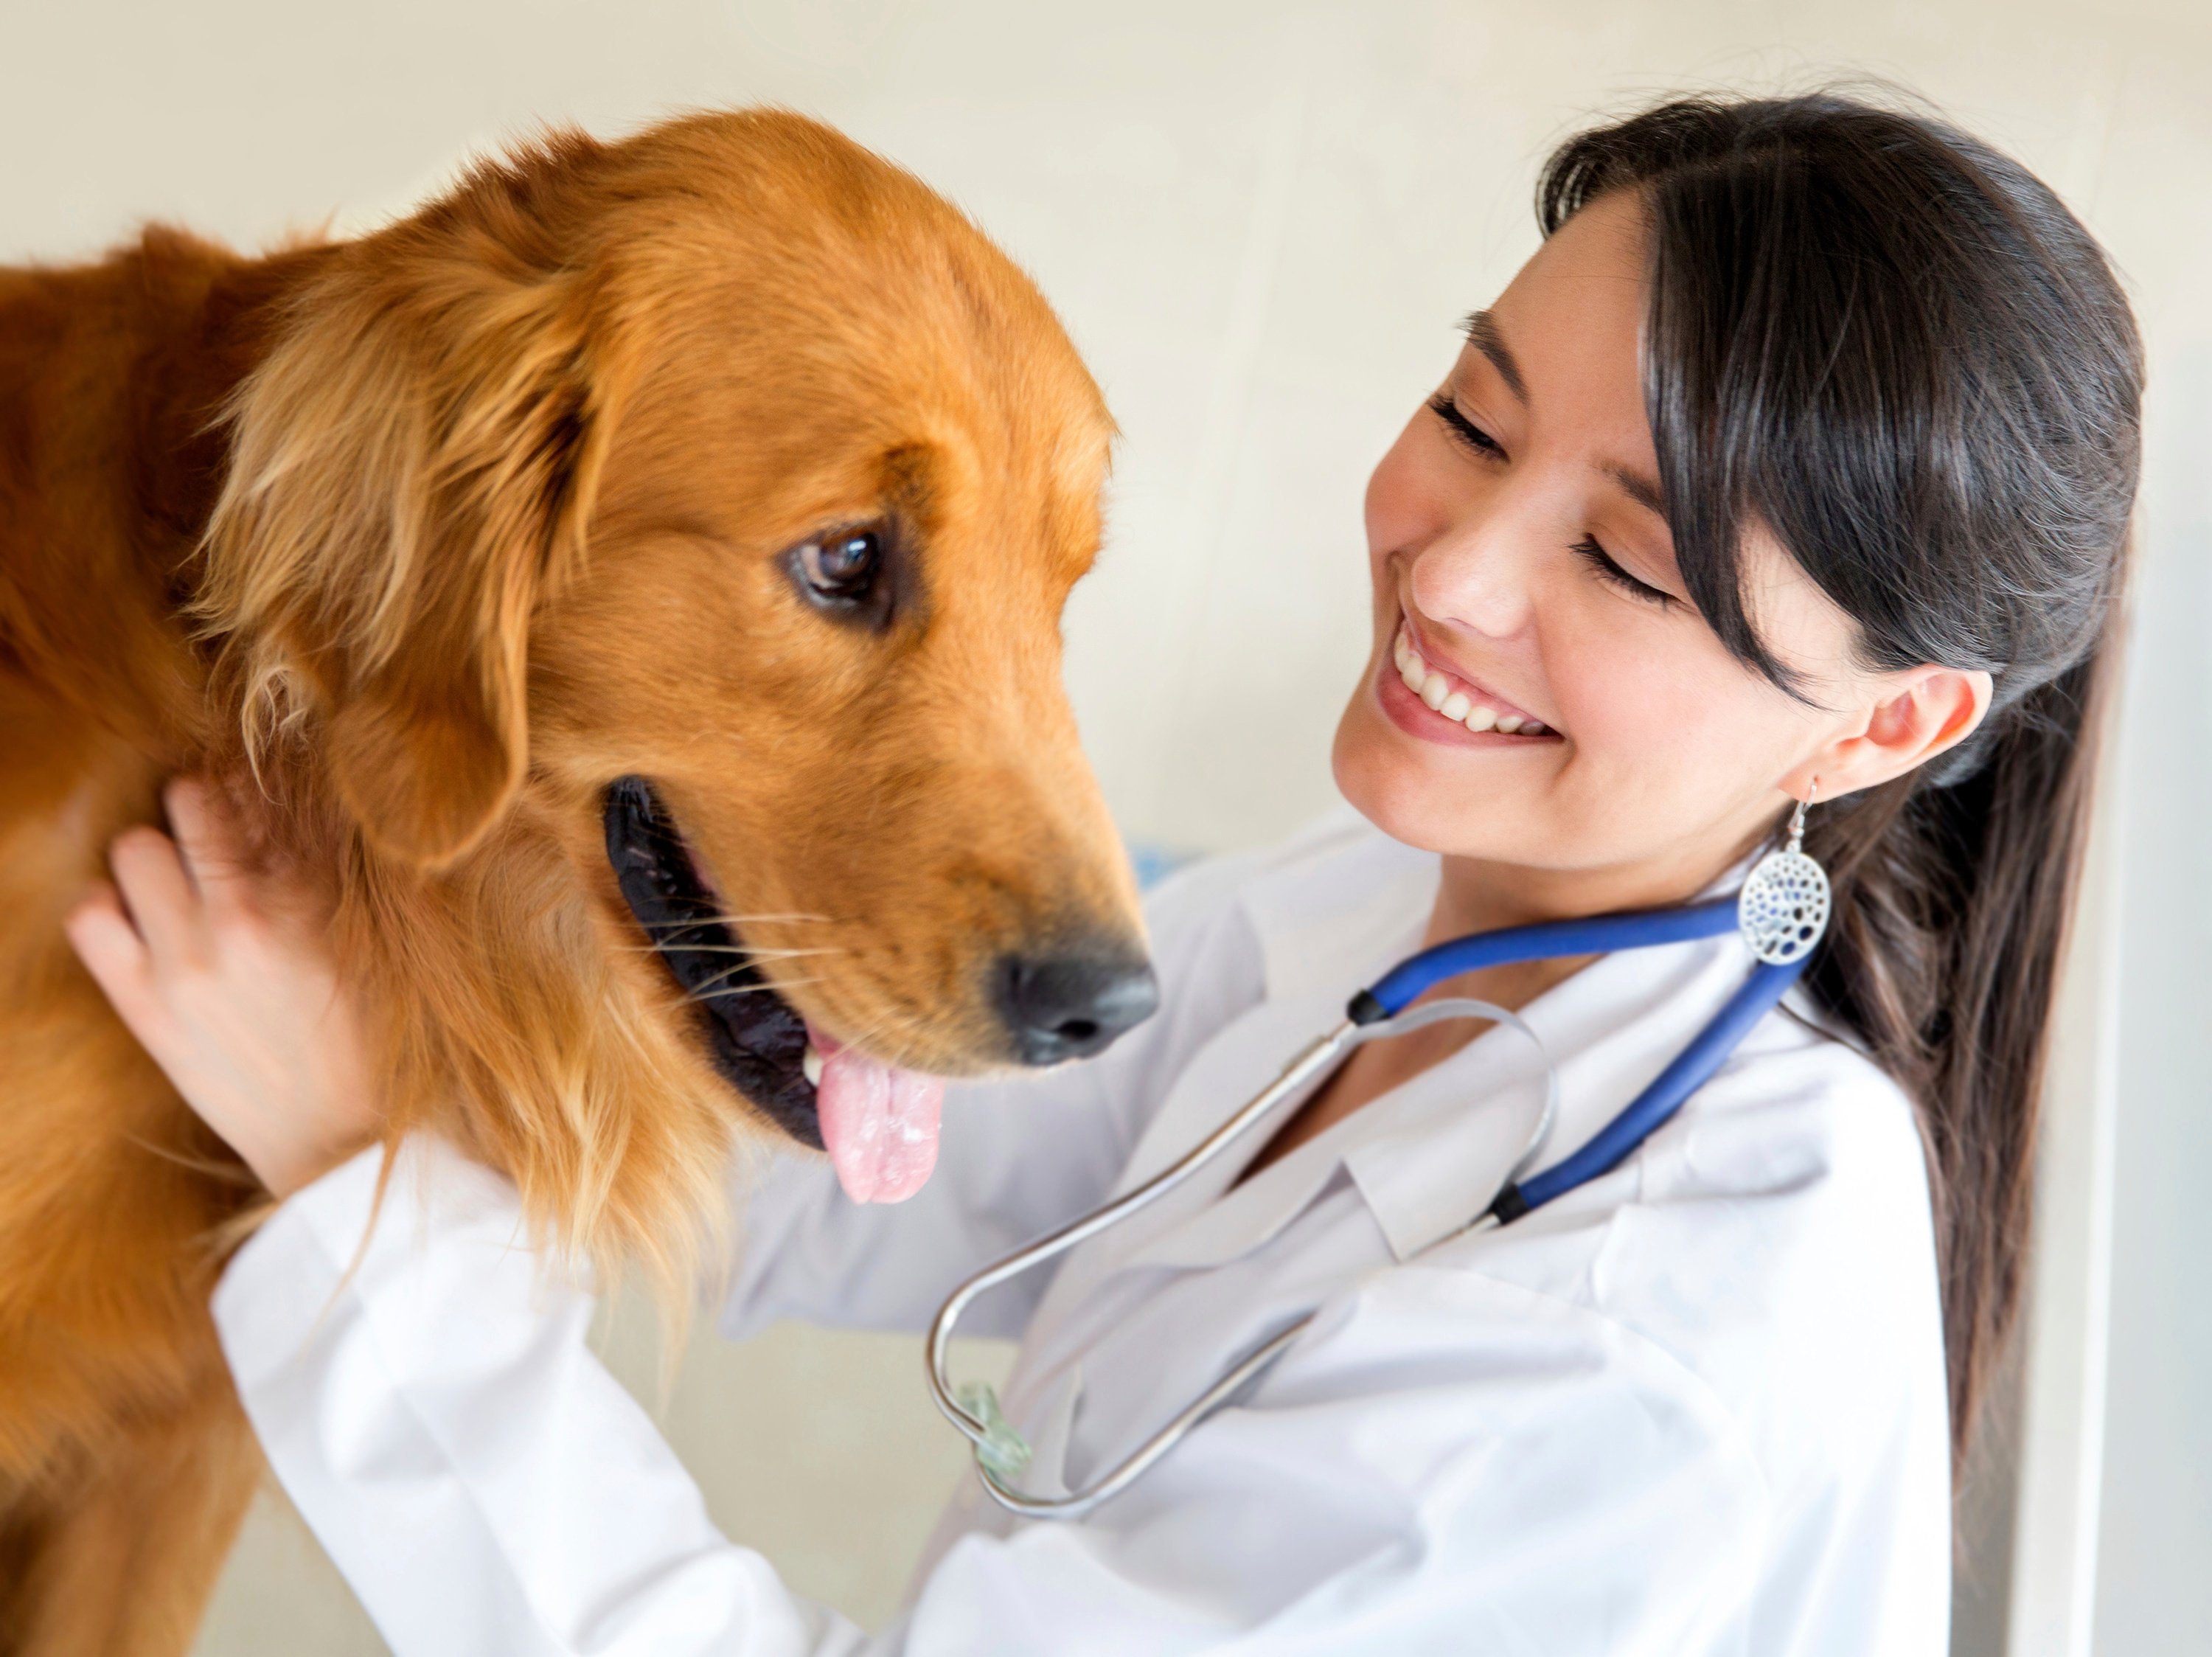 Avoiding credit card fees leads to happy pets and happy vets.